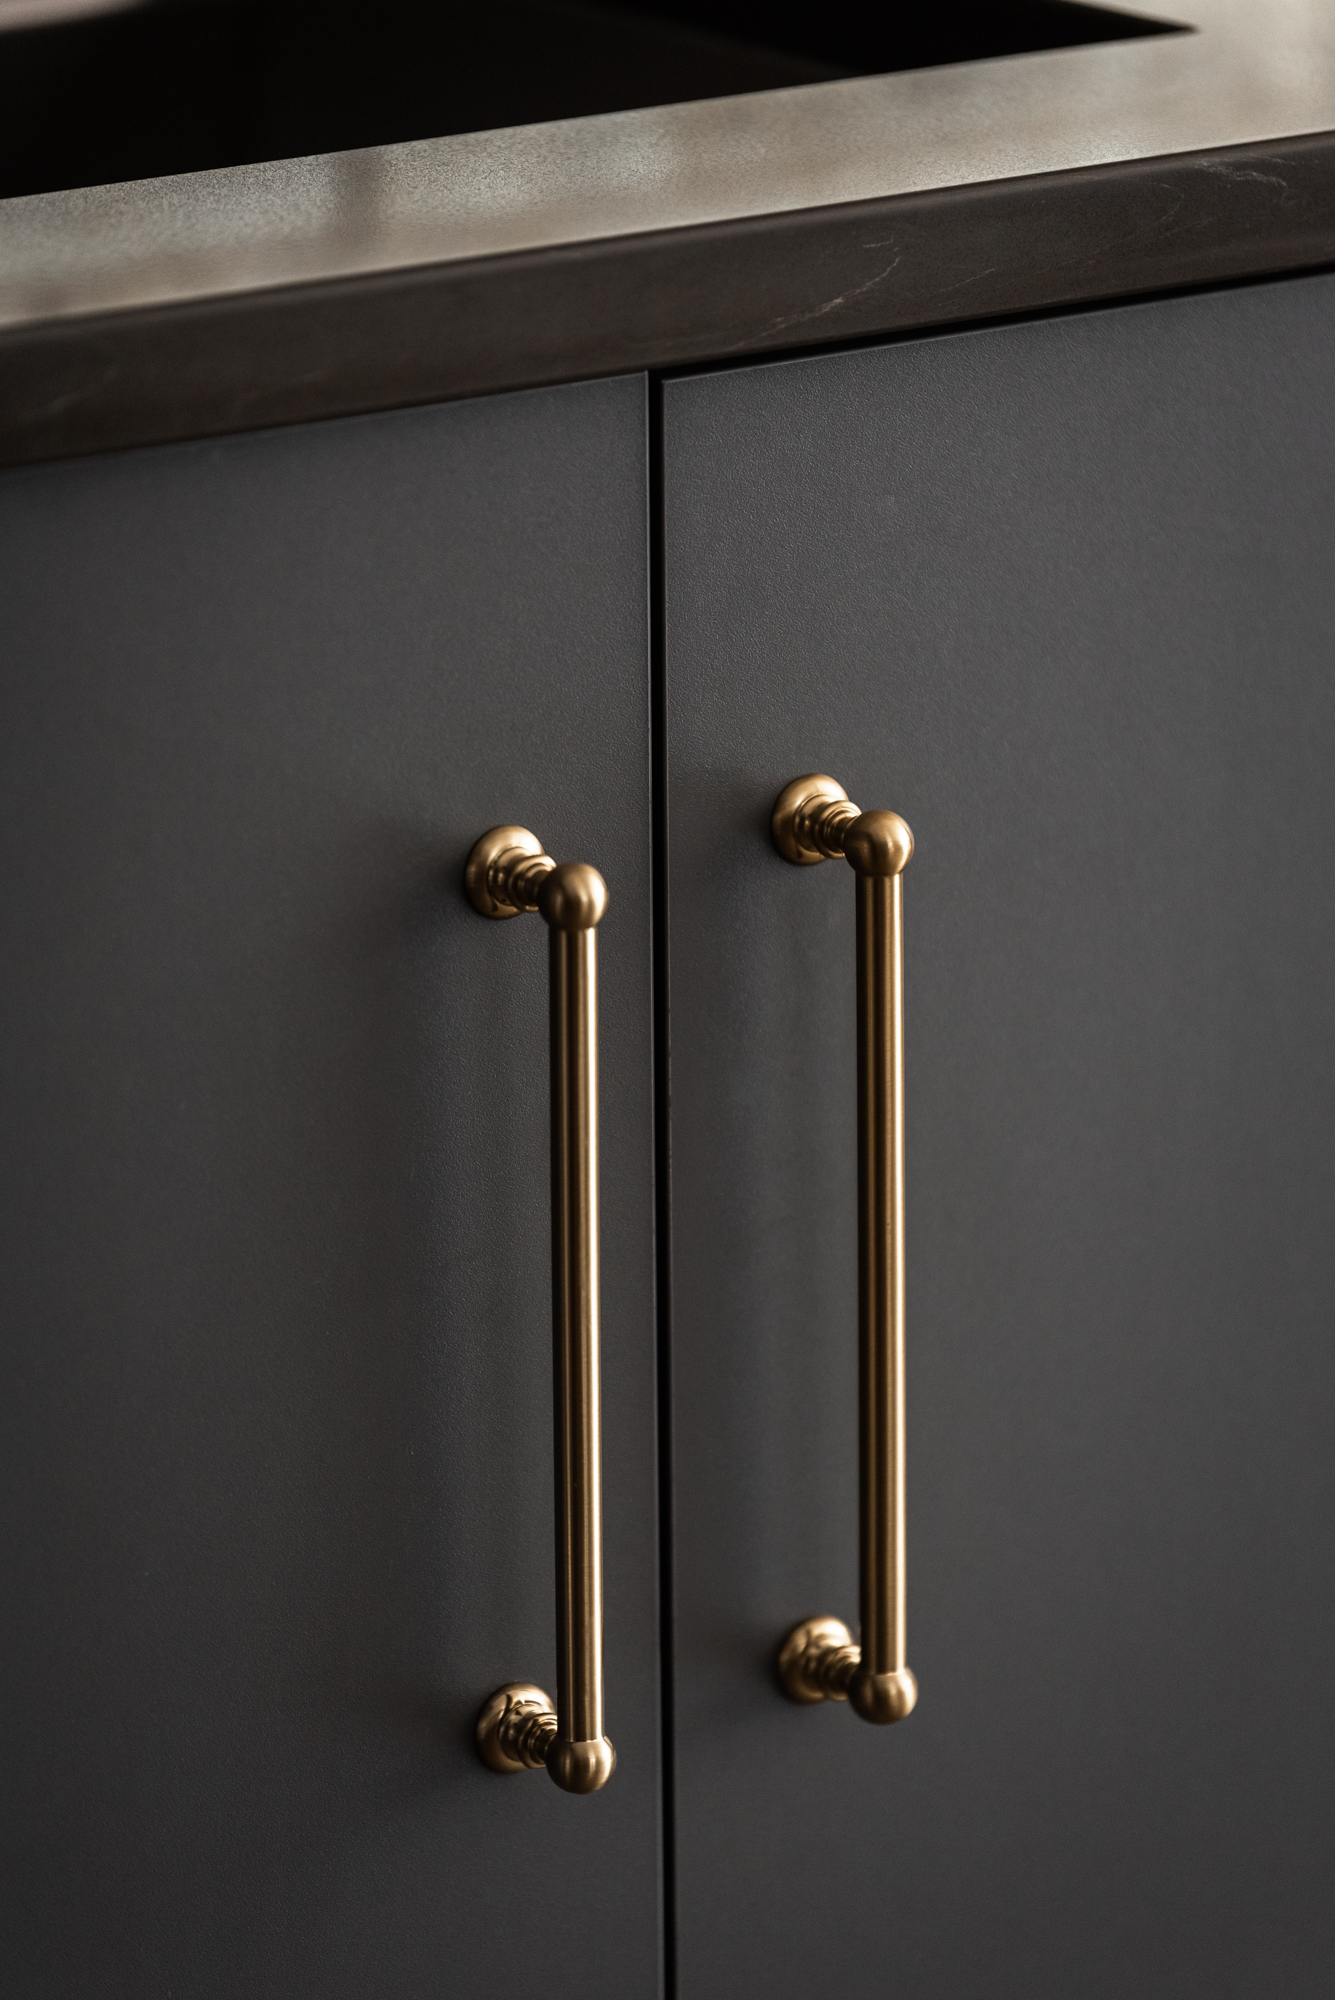 Gray cabinets with brass door pulls